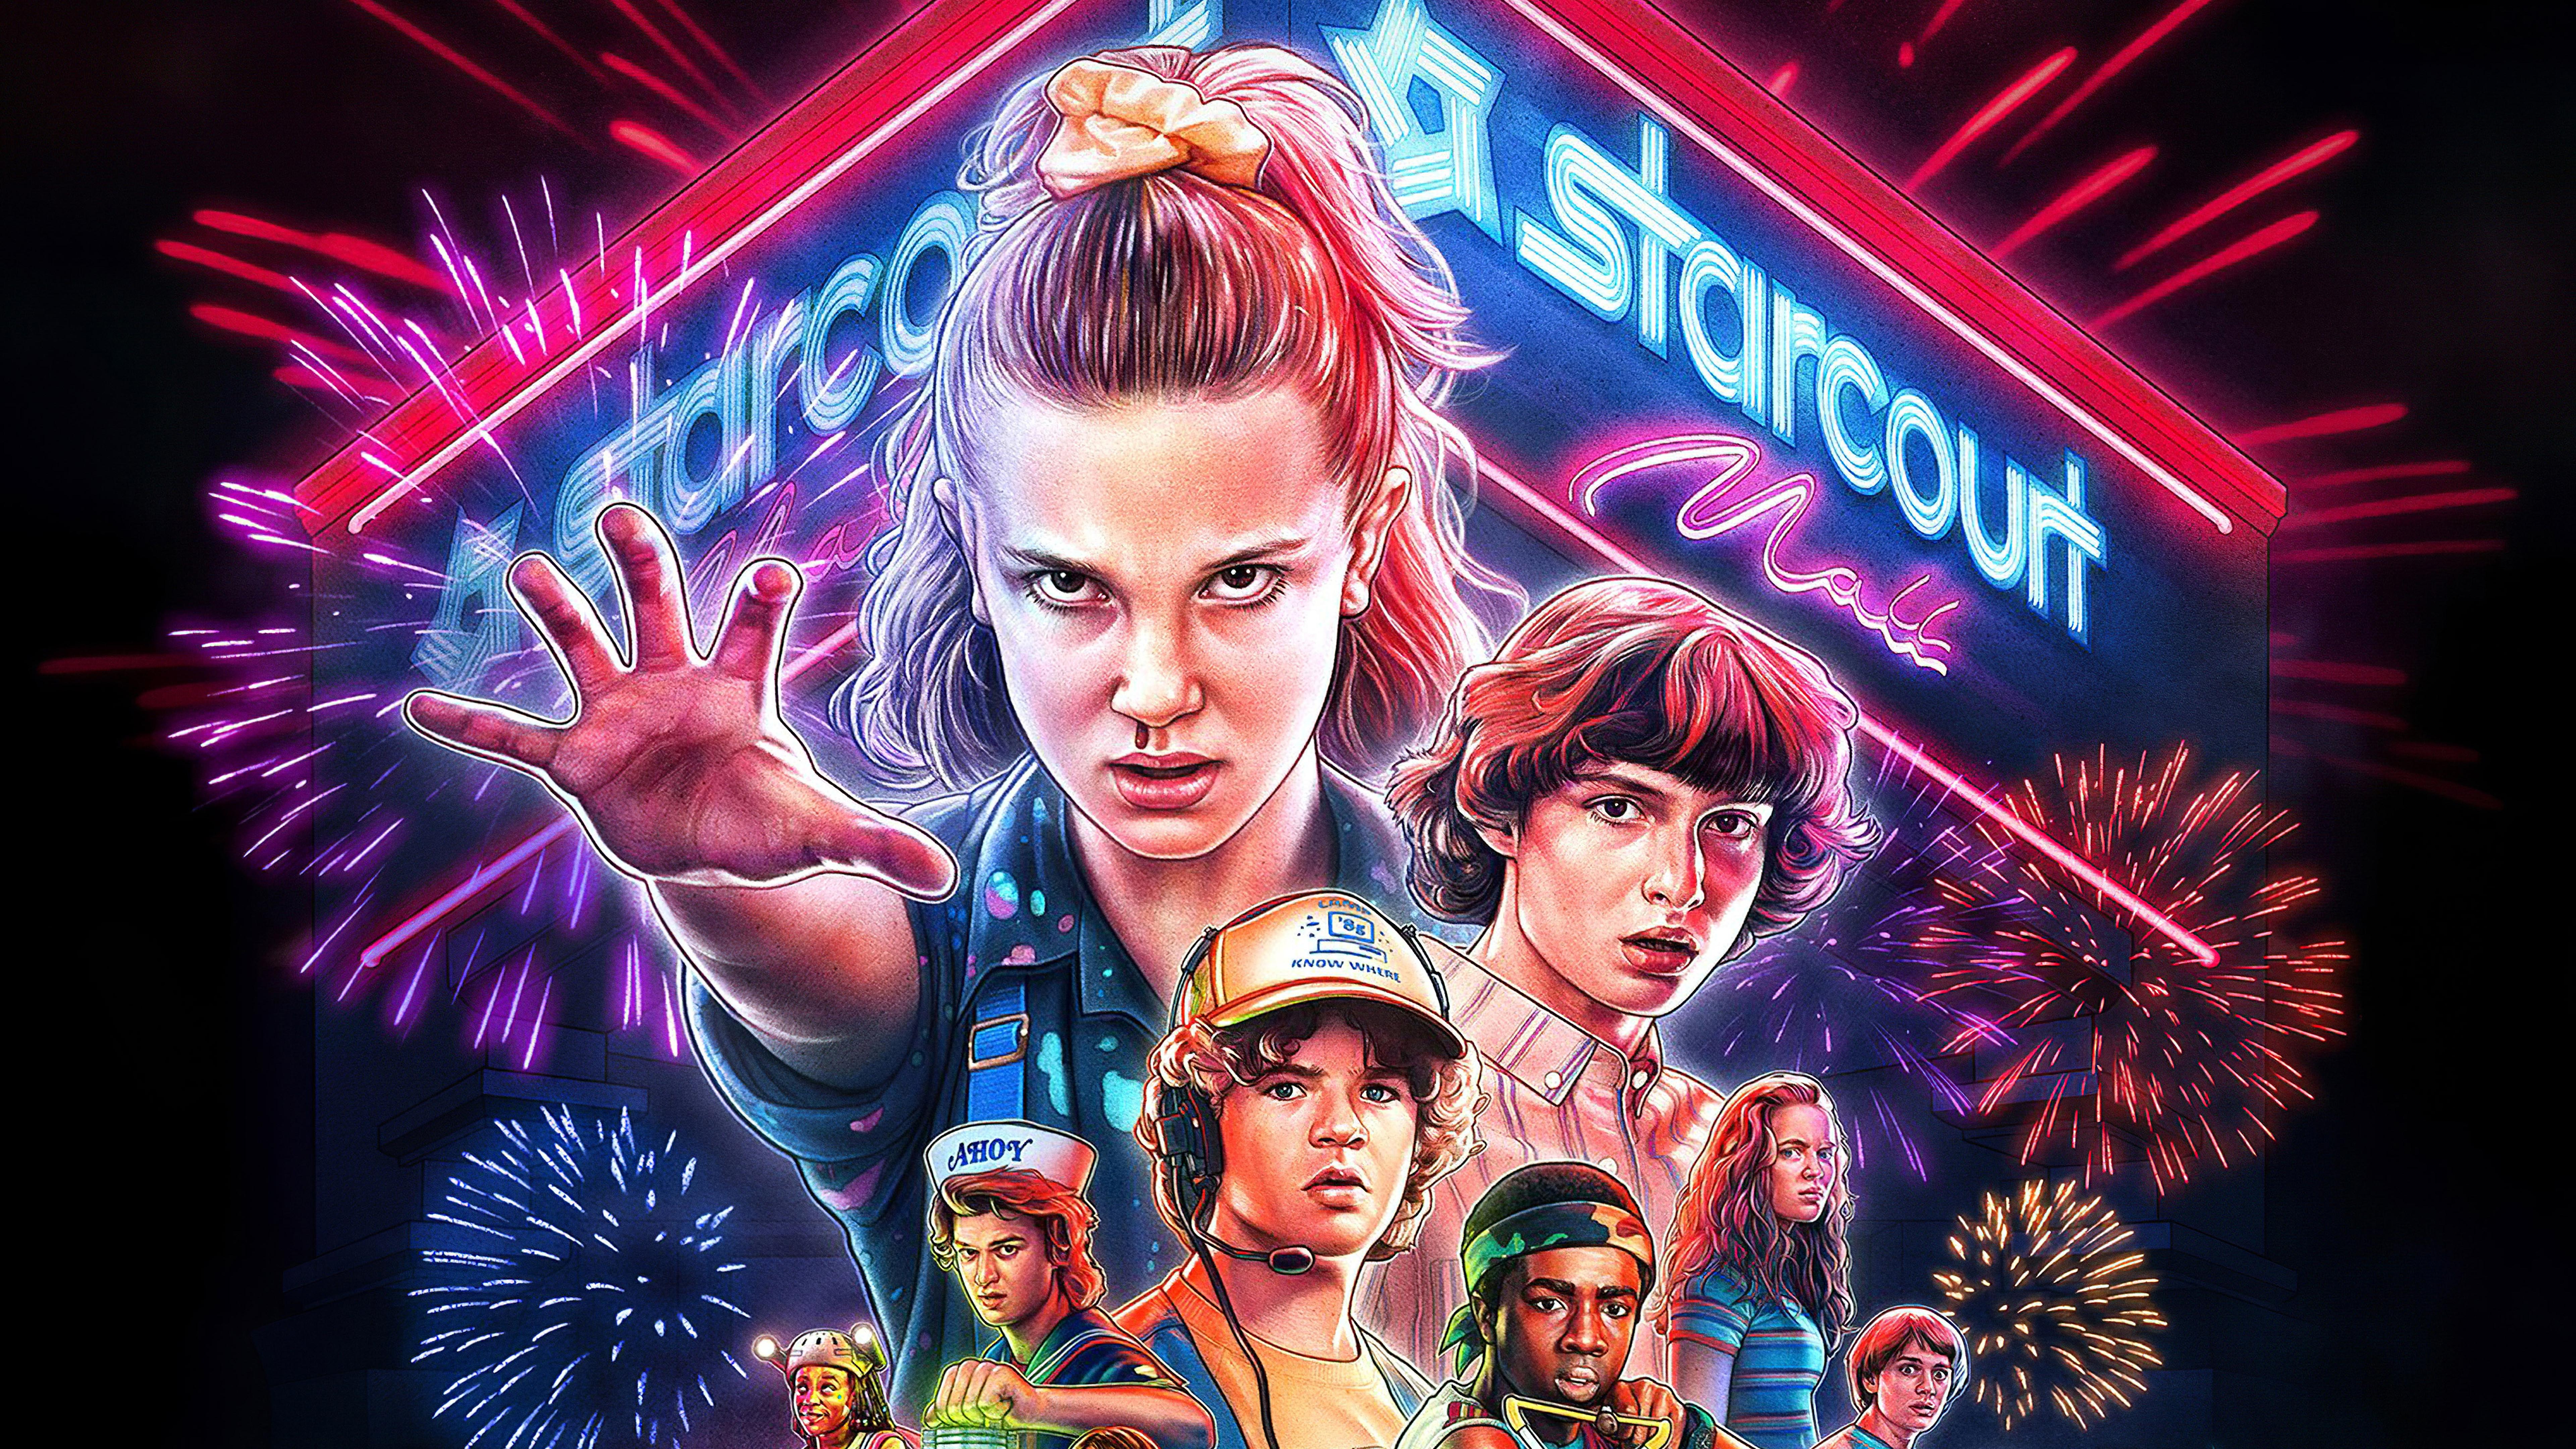 Stranger Things 3 is coming to Netflix on July 4th, 2019. - Stranger Things